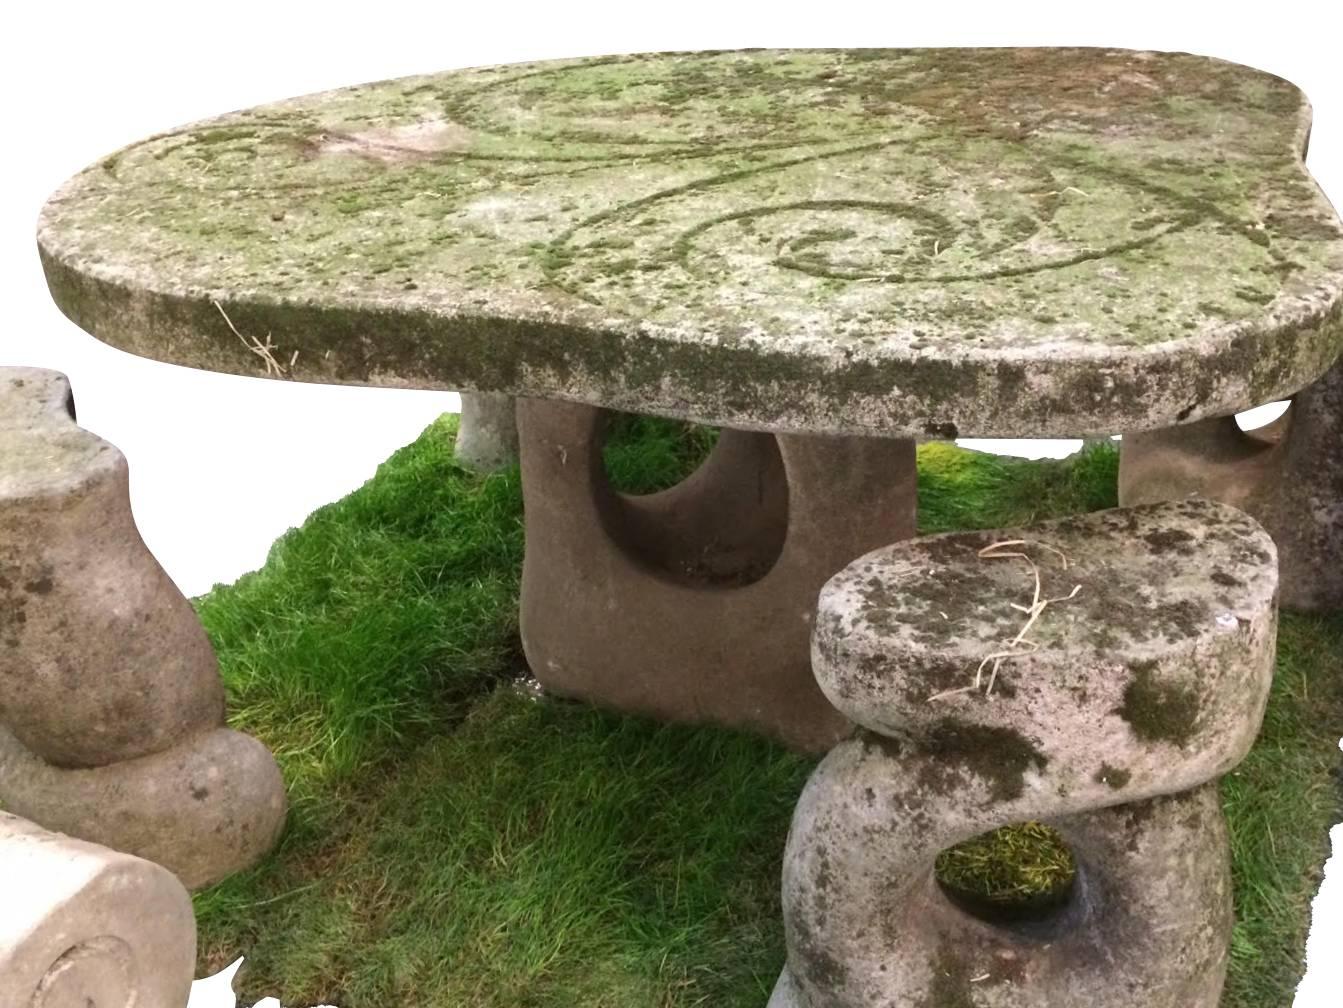 1940s Italian unusual design / shaped vicenza stone garden table with four whimsical stone garden stools.
Engraved decorative detail on top of table.
Natural patina with moss and lichen embedded in stone.
Table measures 44